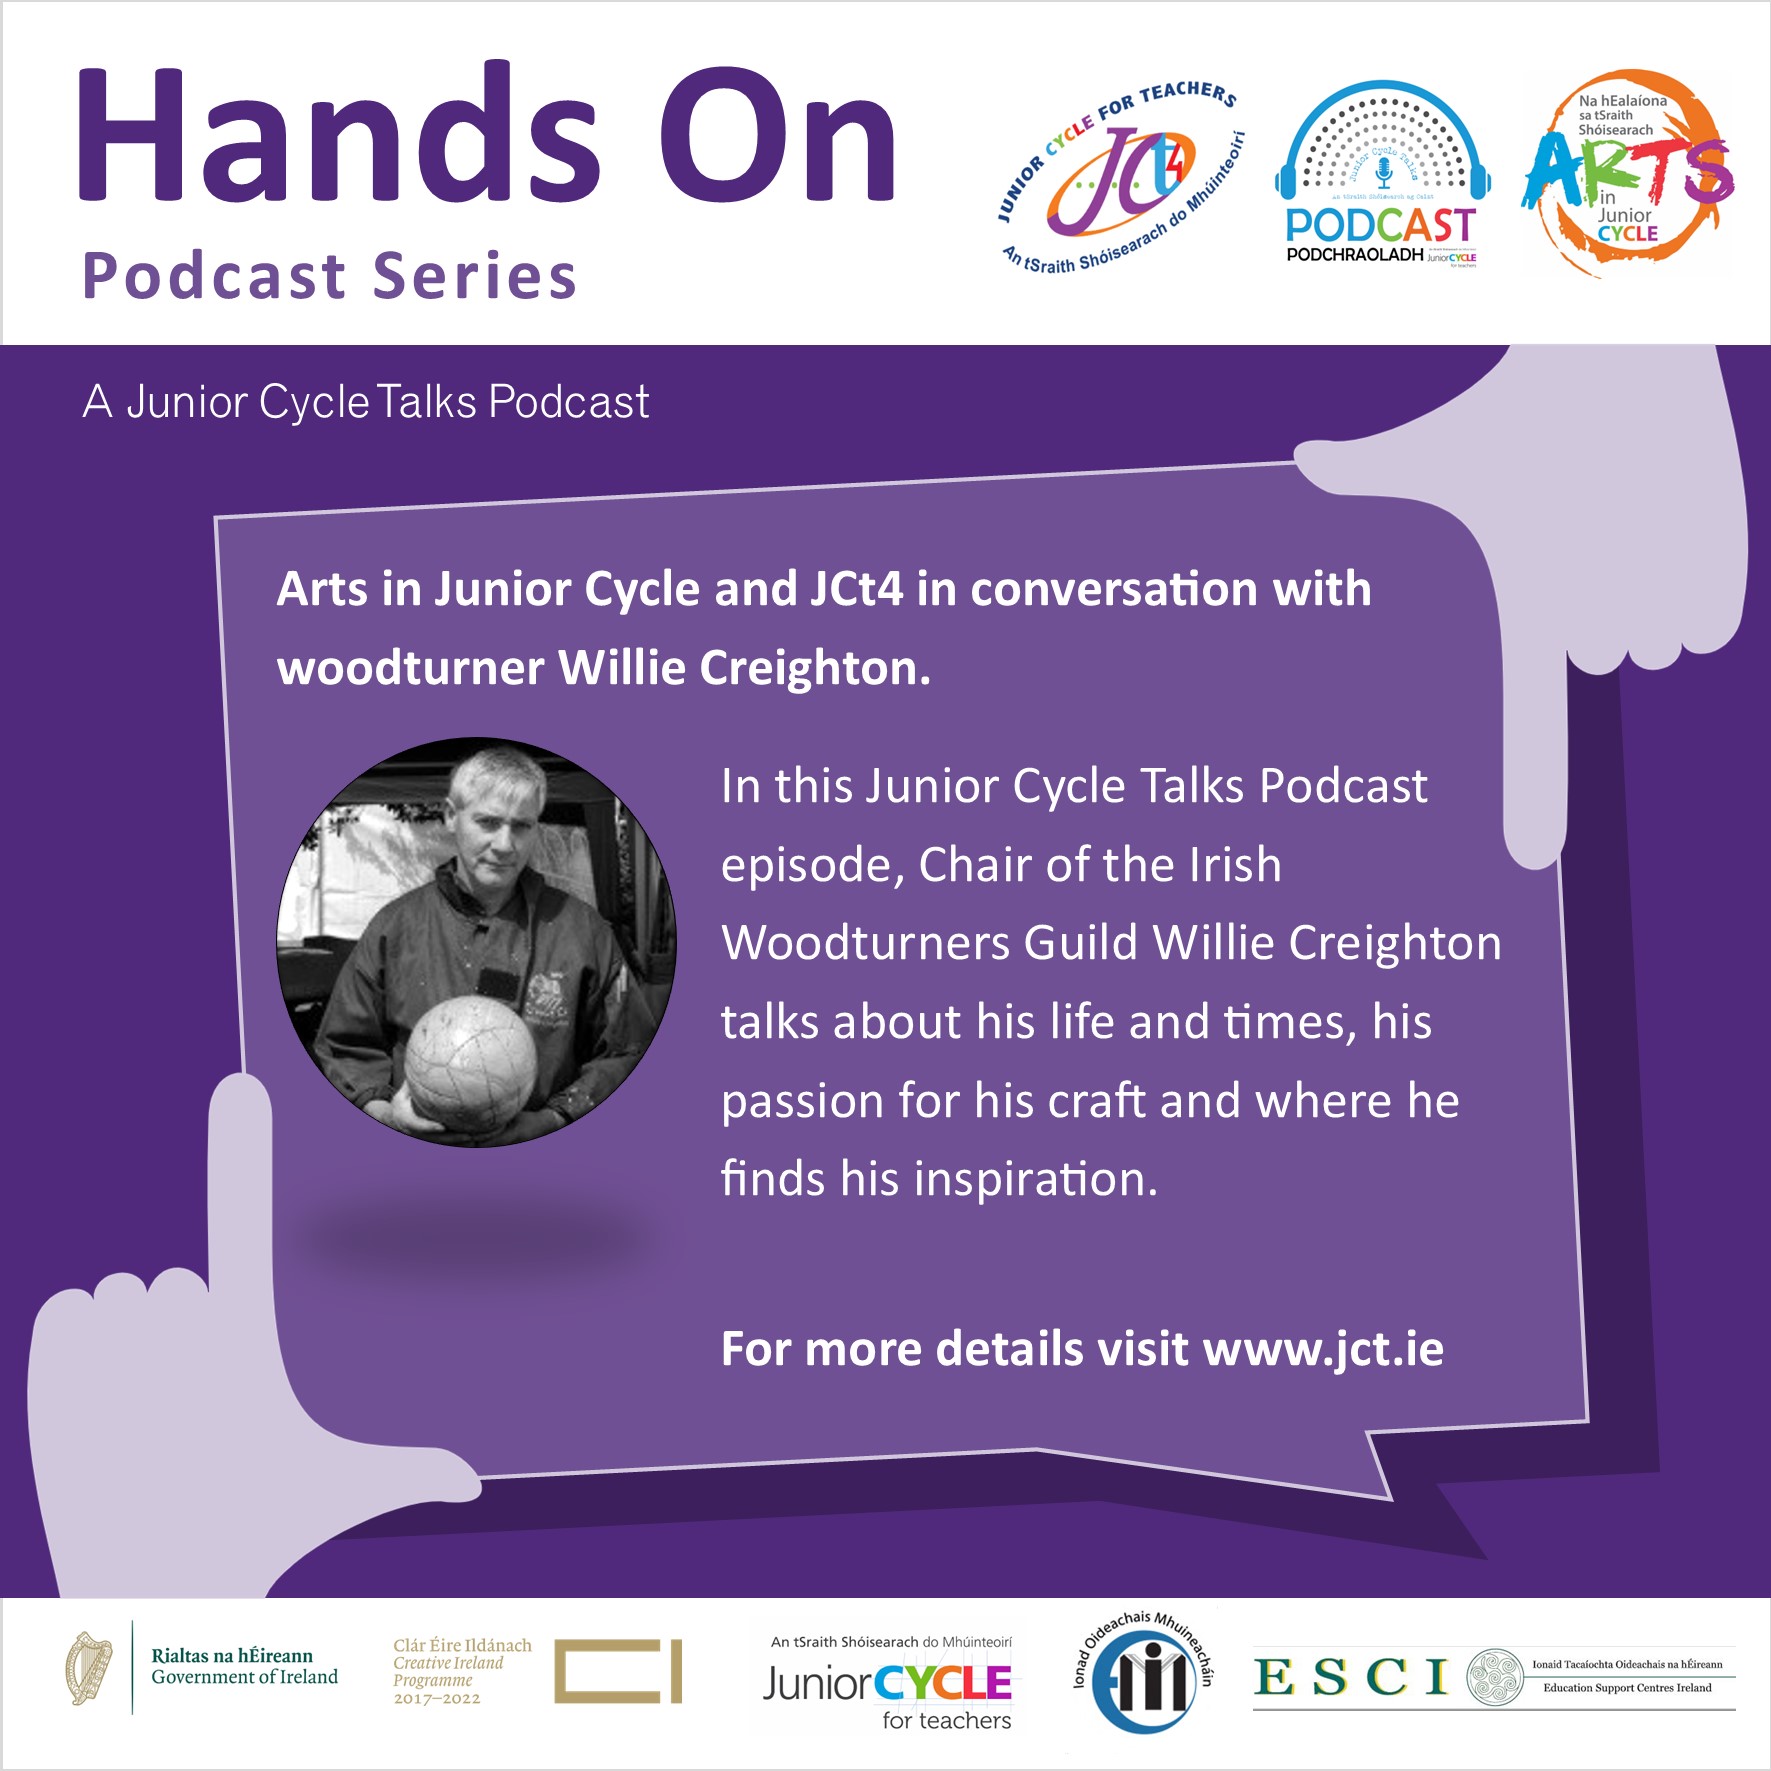 Arts in Junior Cycle and JCt4 in Conversation with Woodturner Willie Creighton